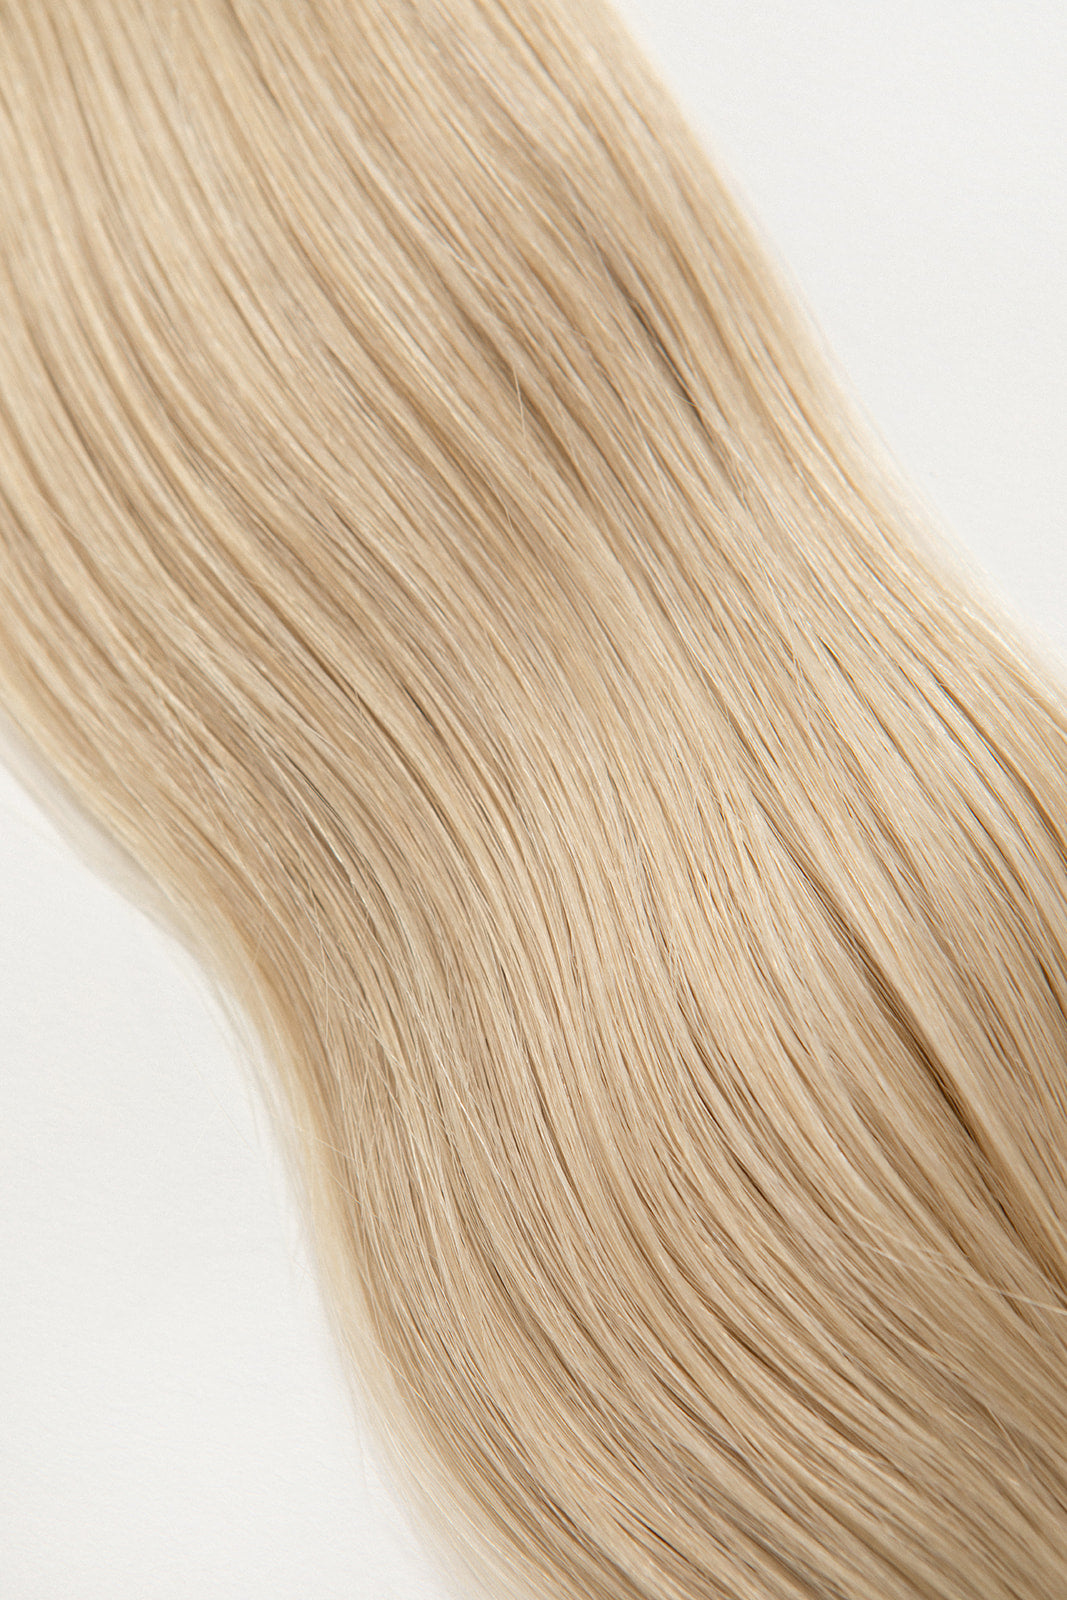 Pearl is our ashy blonde, bright but opalescent. Stylist lingo: Ash level 10 The Harloc Ponytail Extension is our clip-in ponytail that is made from ethically sourced, Remy Slavic hair. It is a quick way to instantly add length and volume to your ponytail and it comes in two lengths, 18-20” and 20-24”. It comes with a velcro base and clip to secure the ponytail.  Available in 10 of our beautiful shades.